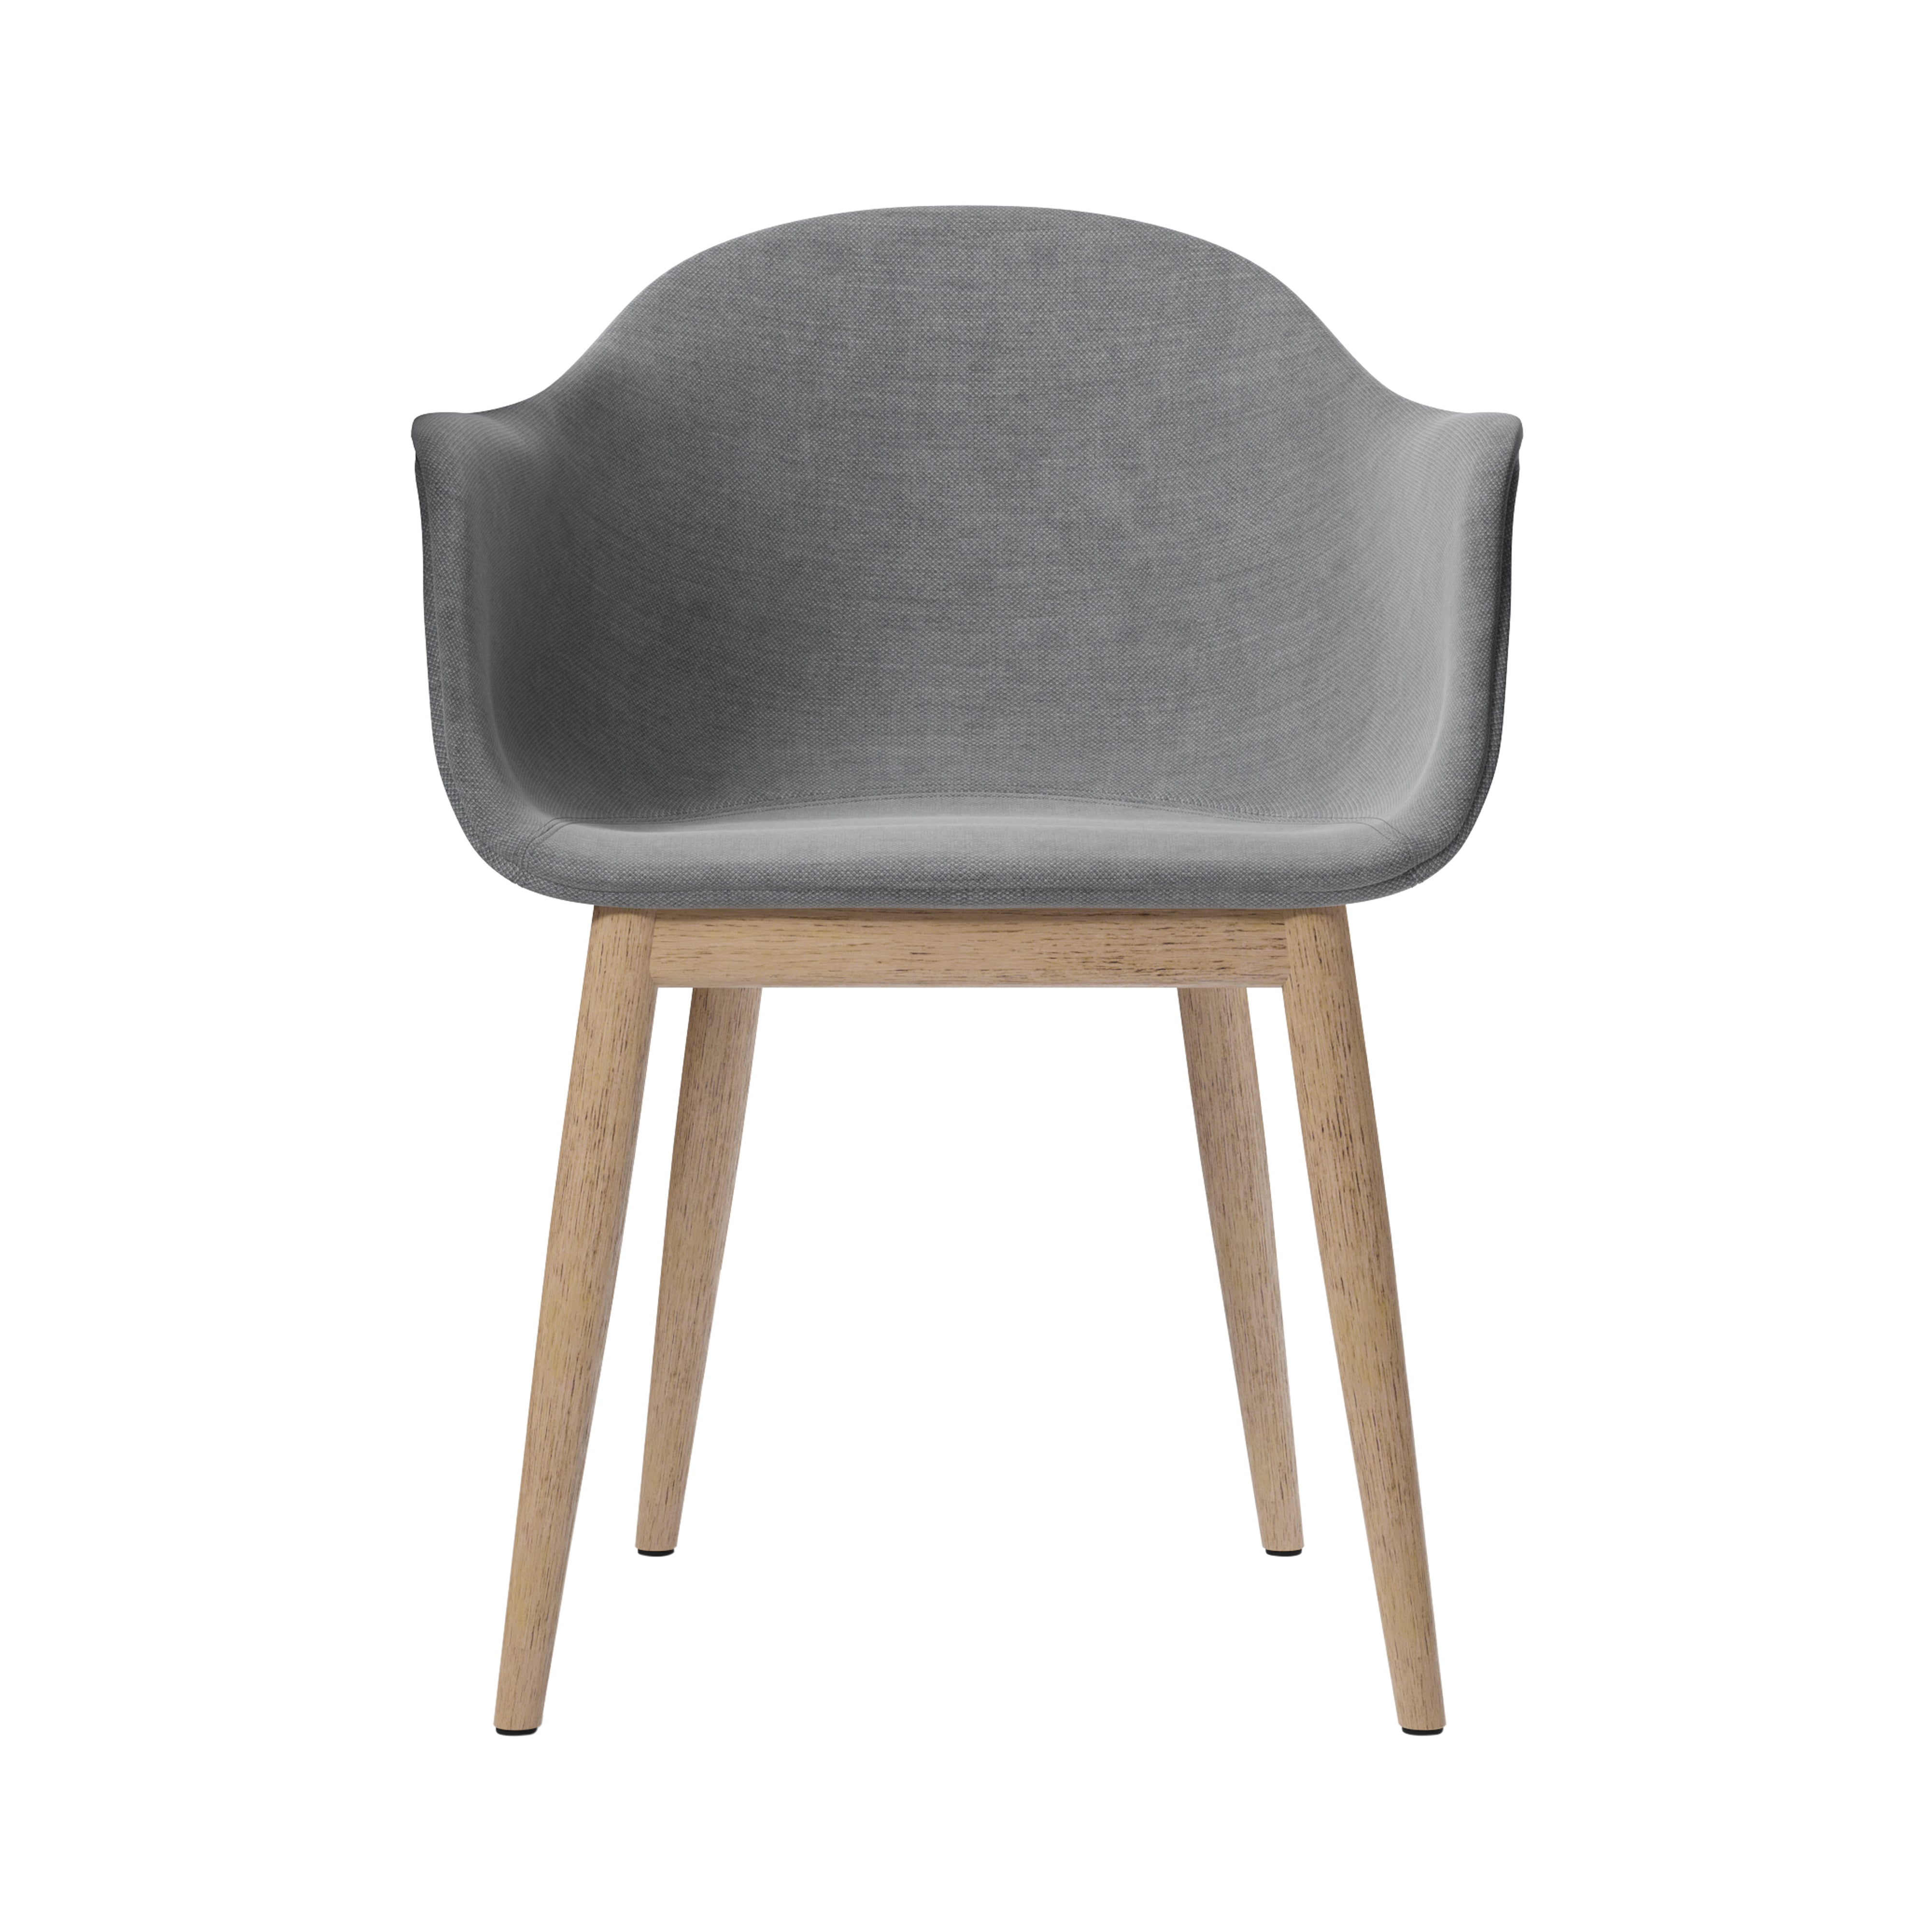 Harbour Dining Chair: Wood Base Upholstered + Natural Oak + Fiord2 751